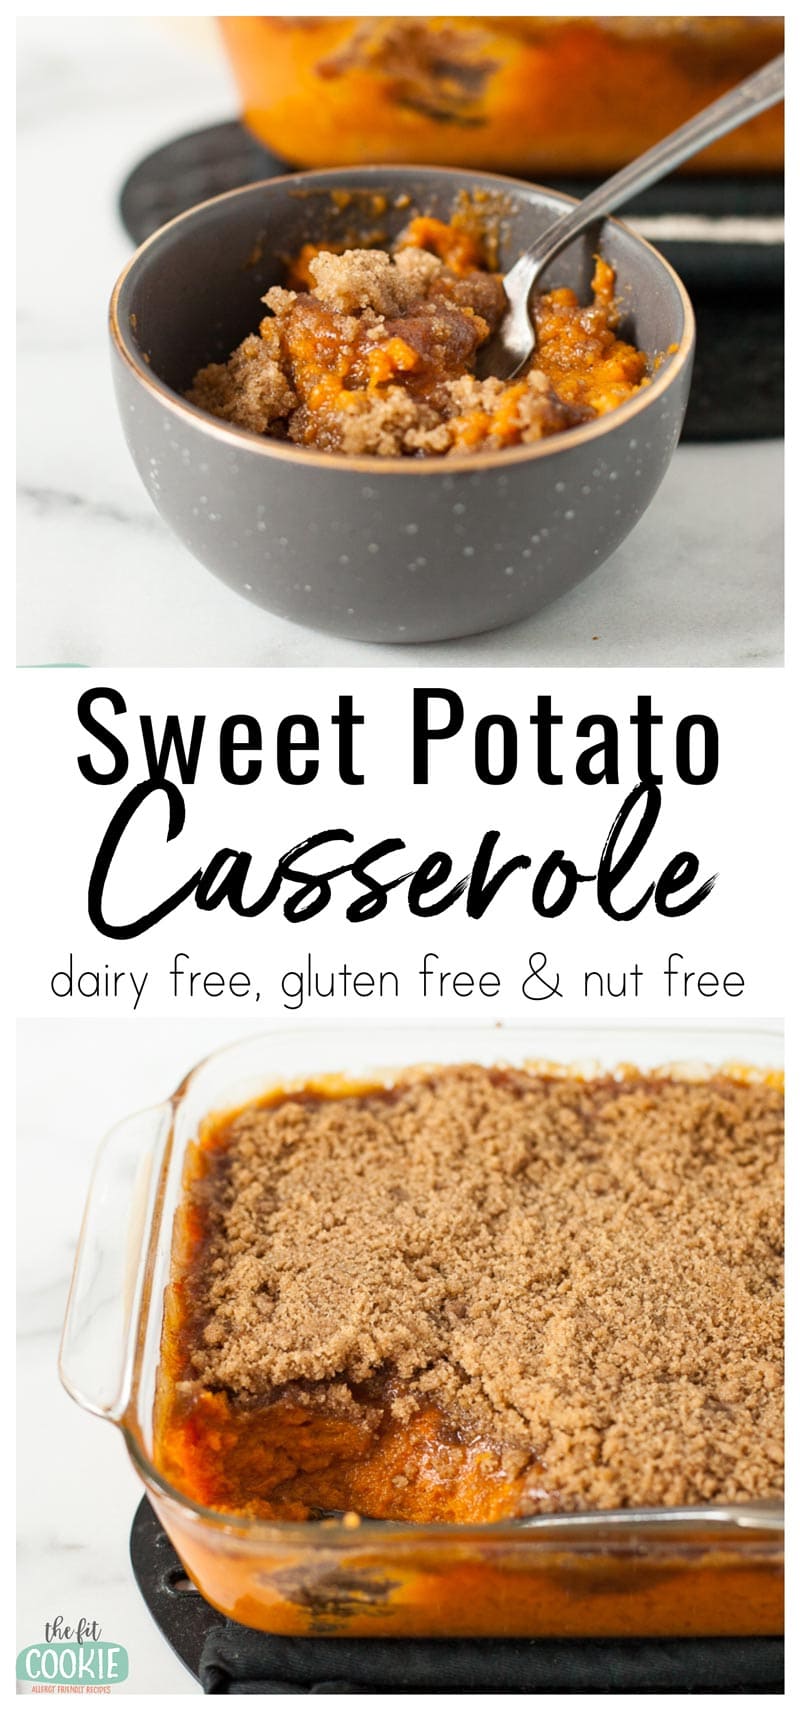 photo collage of sweet potato casserole in a gray bowl with a spoon